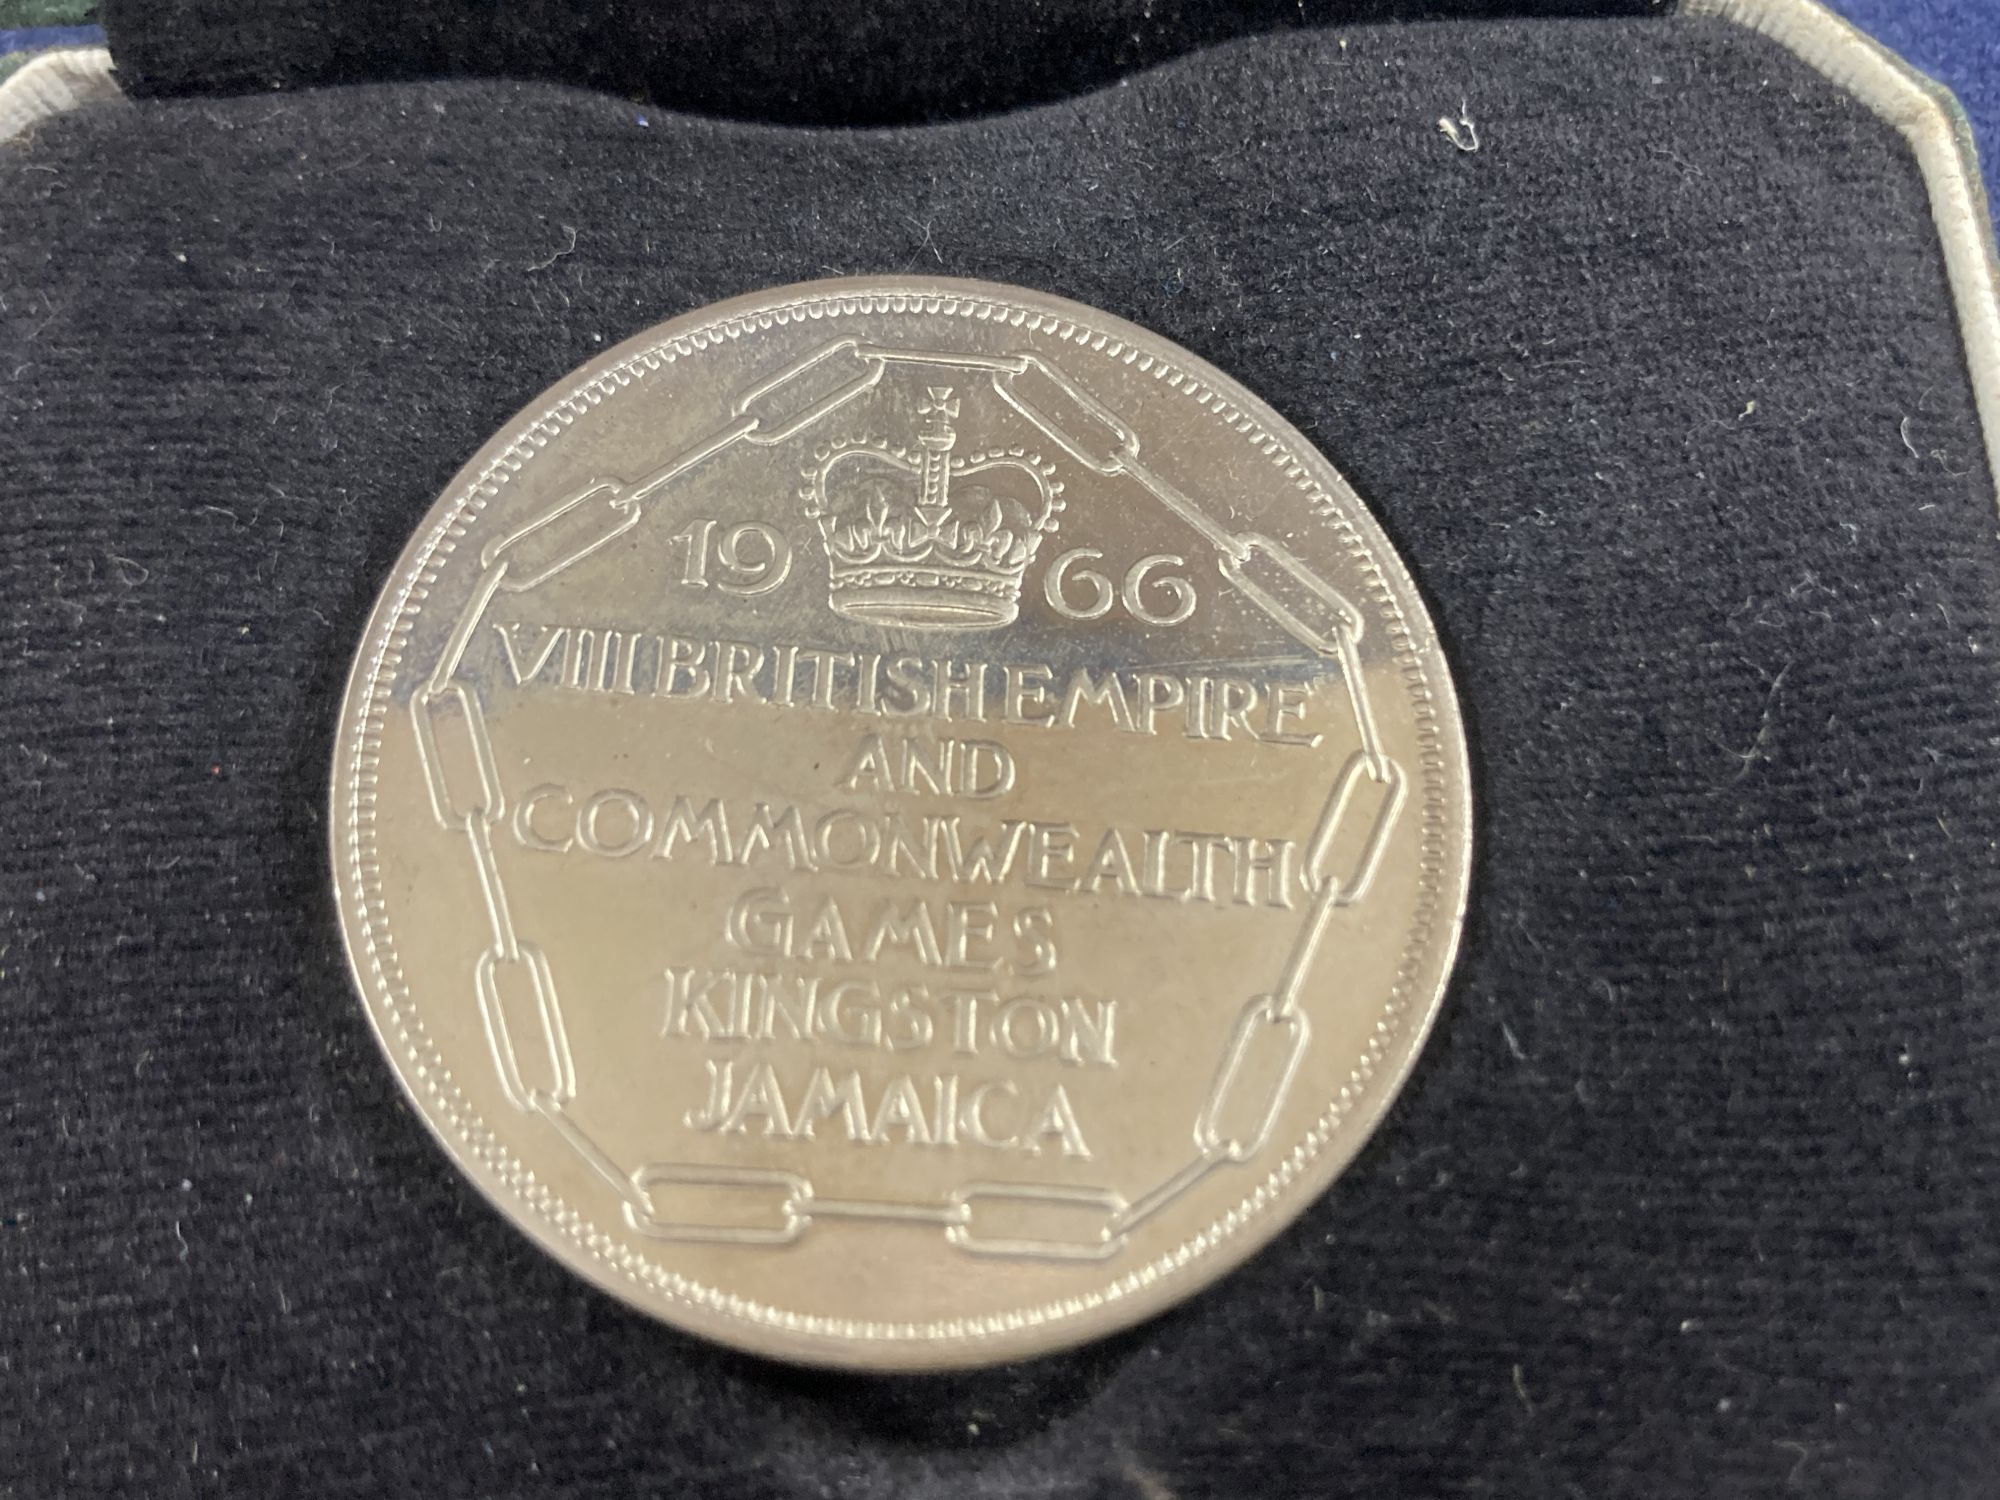 A Jamaican Commonwealth silver medal